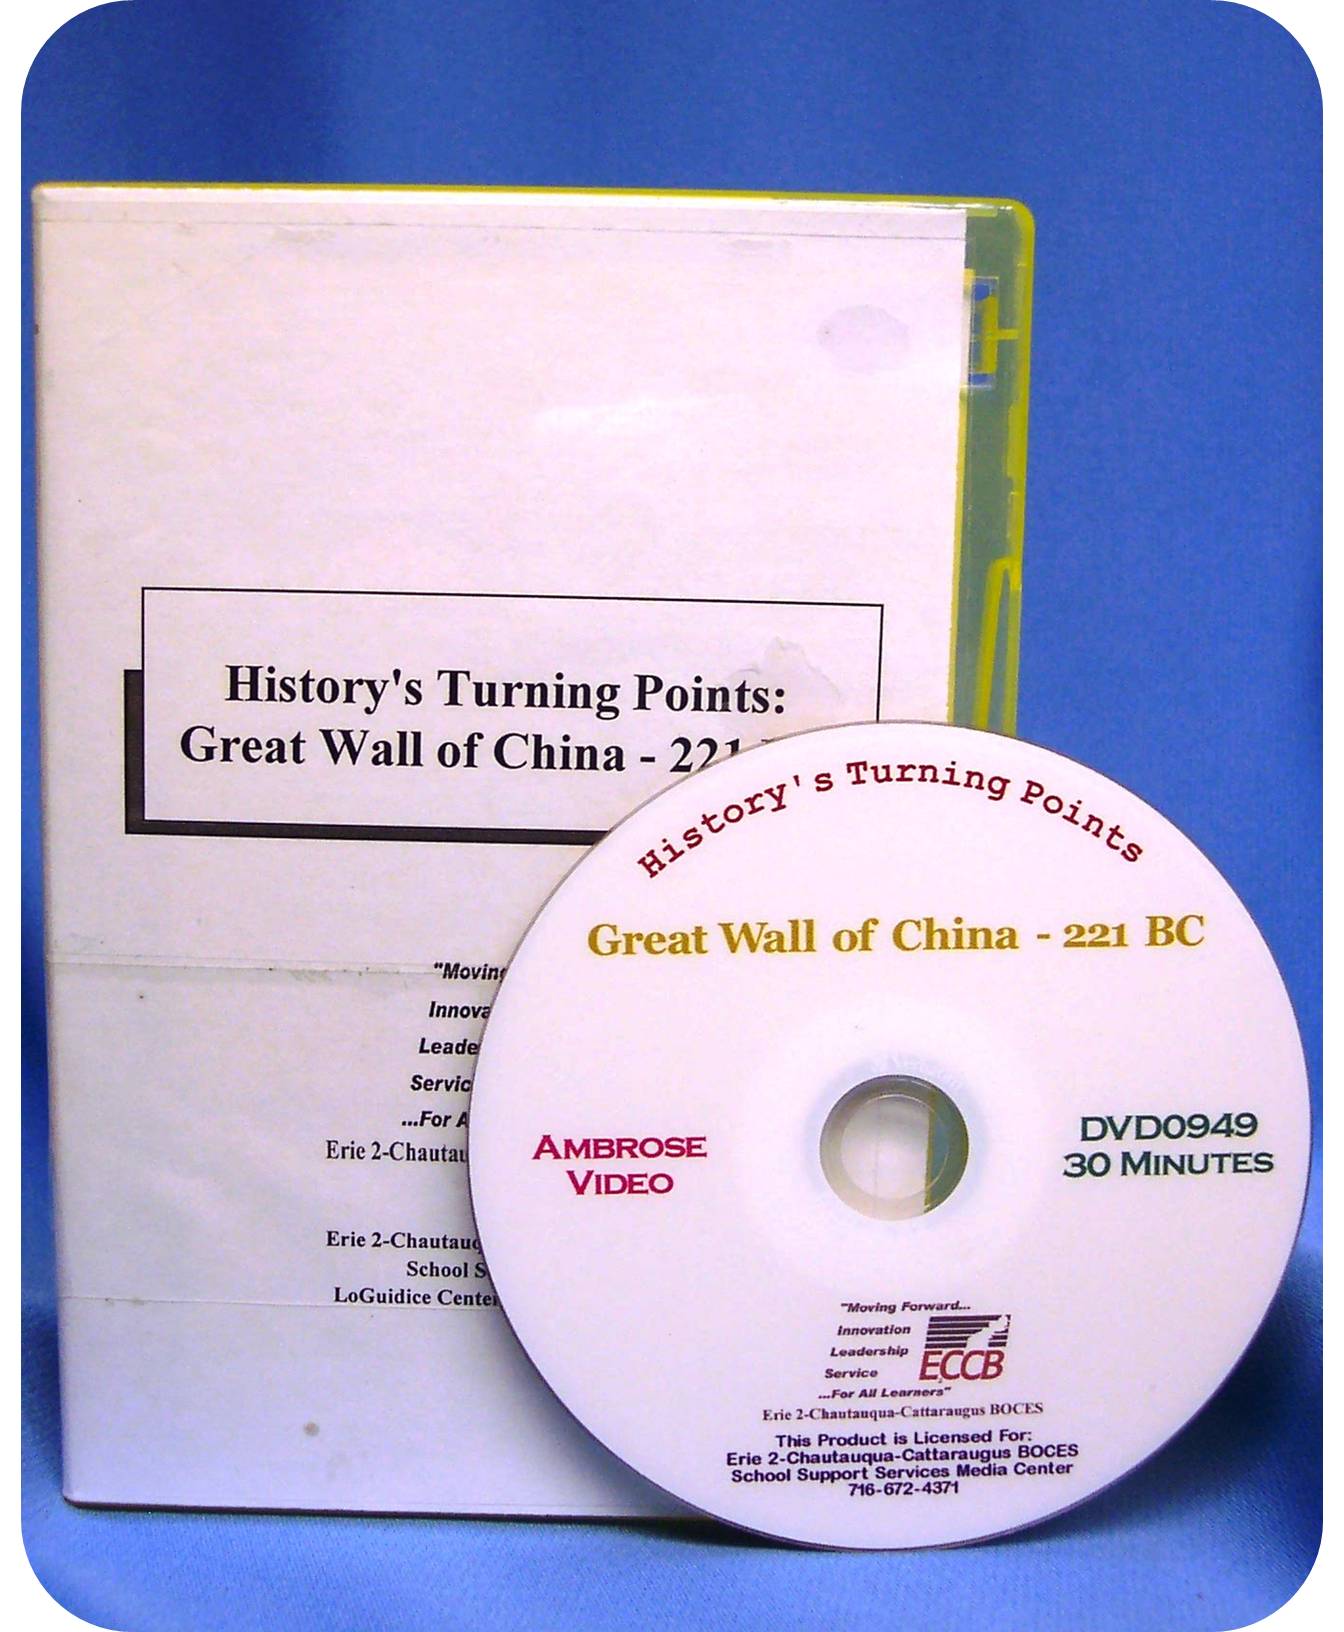 History's Turning Points: Great Wall of China - 221 BC